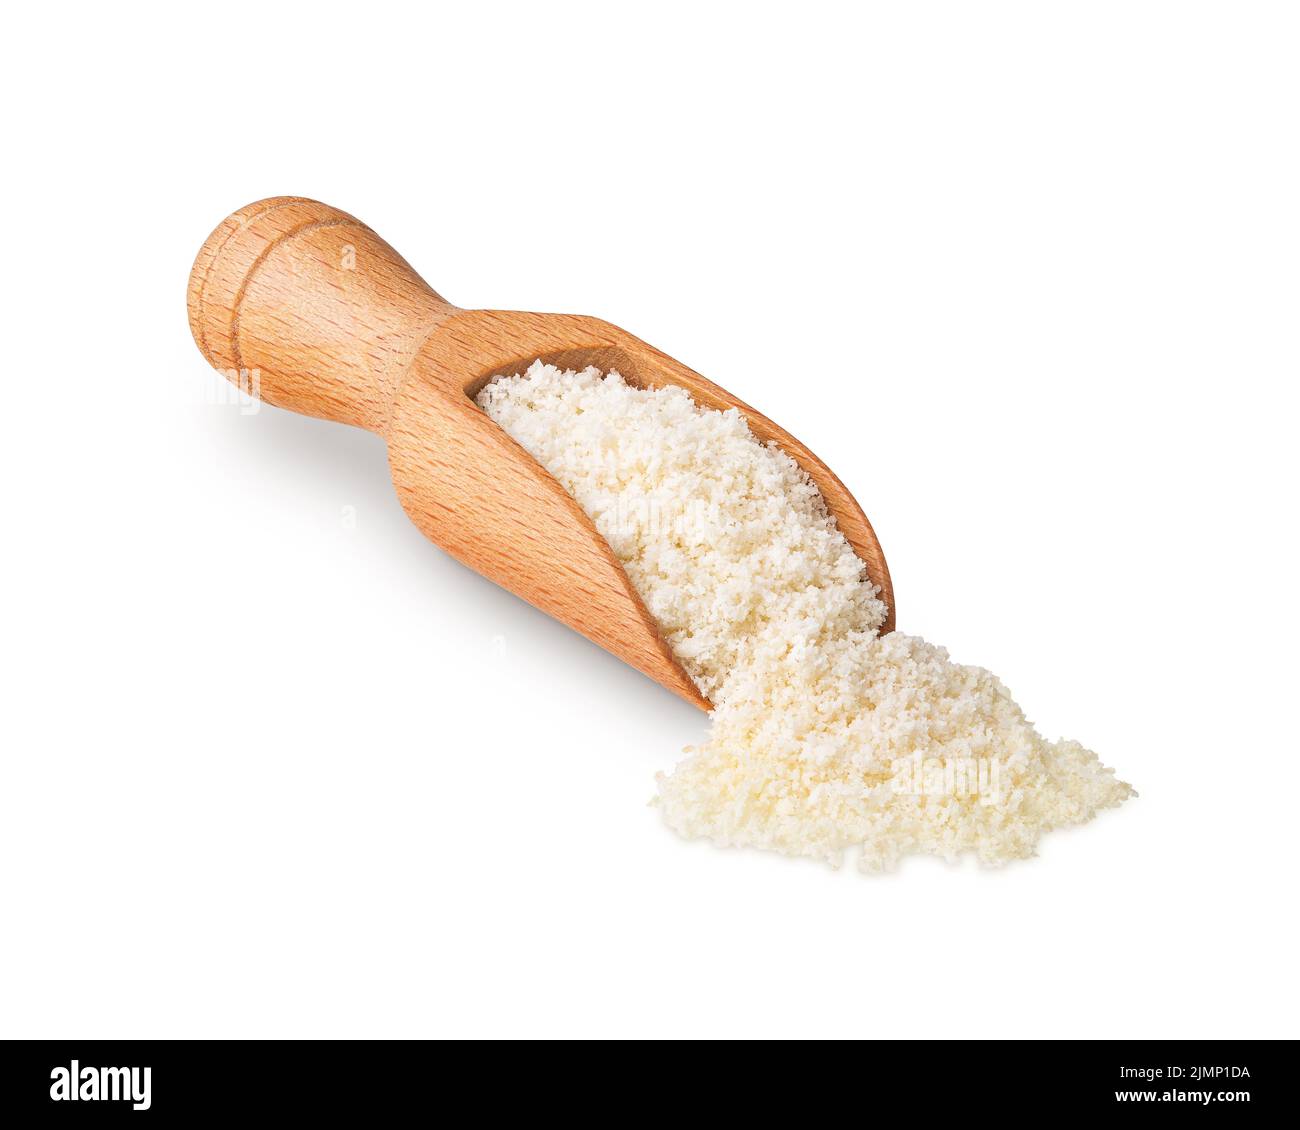 Wooden scoop full of almond flour isolated on white Stock Photo